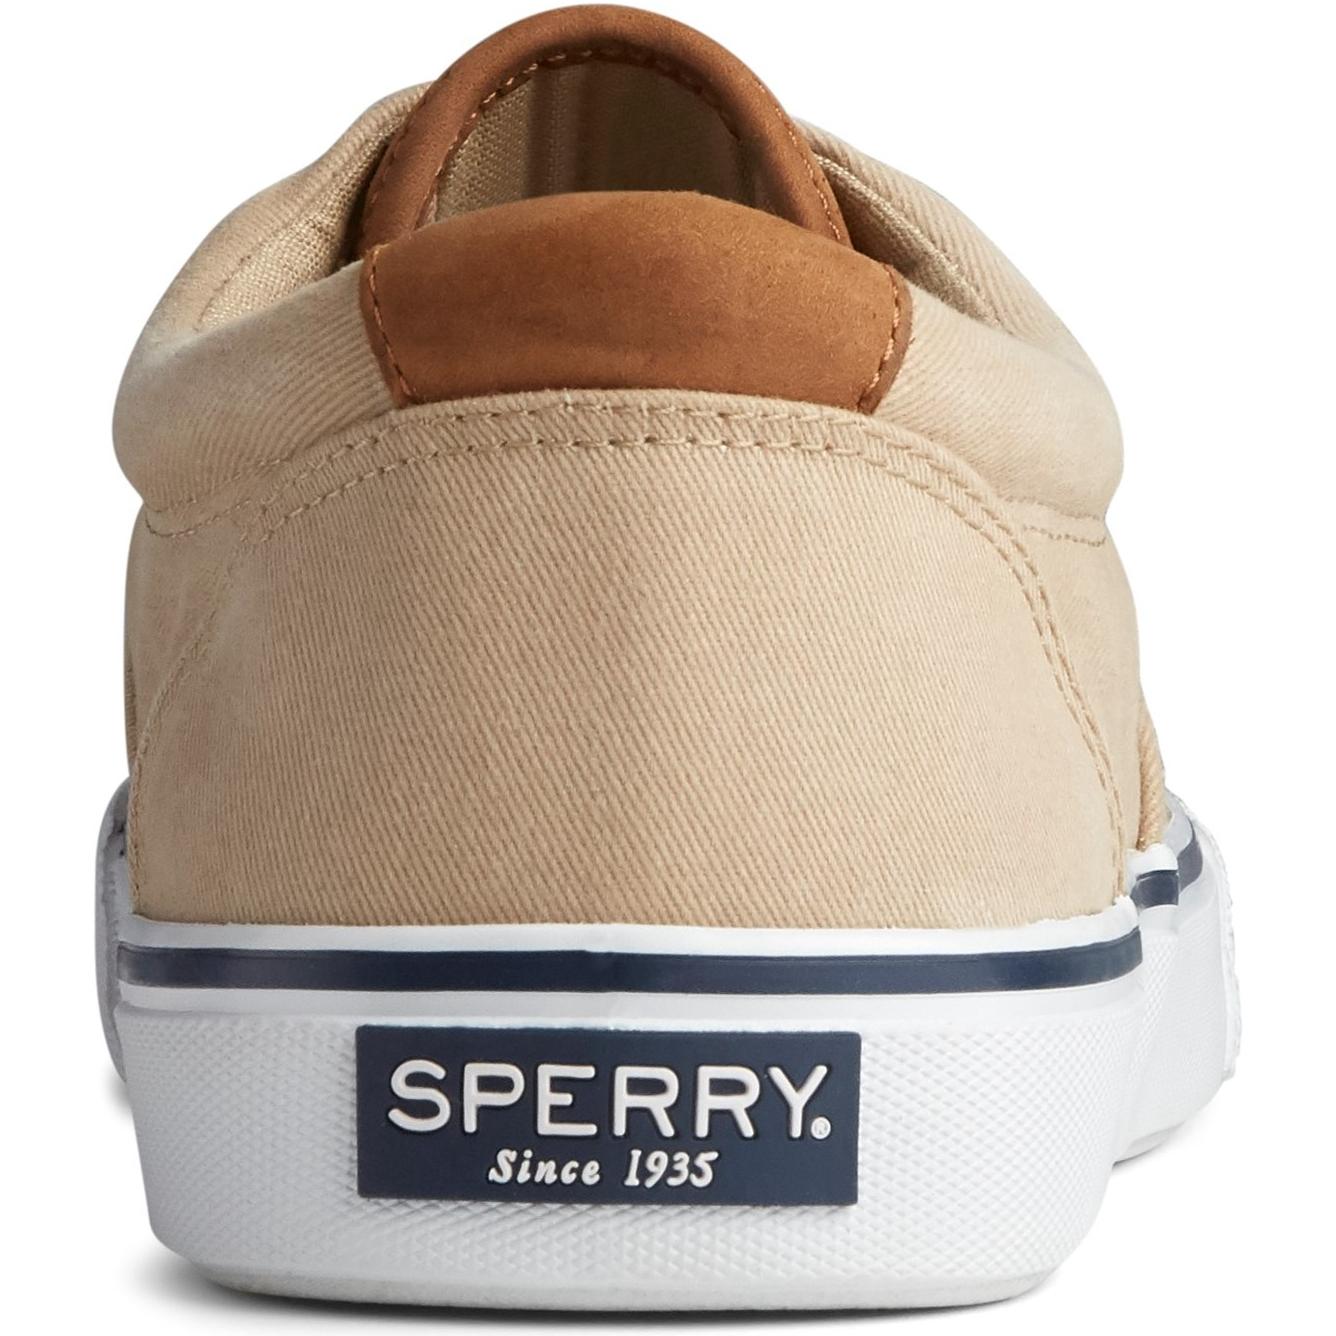 Sperry Top-sider Striper II CVO Shoes